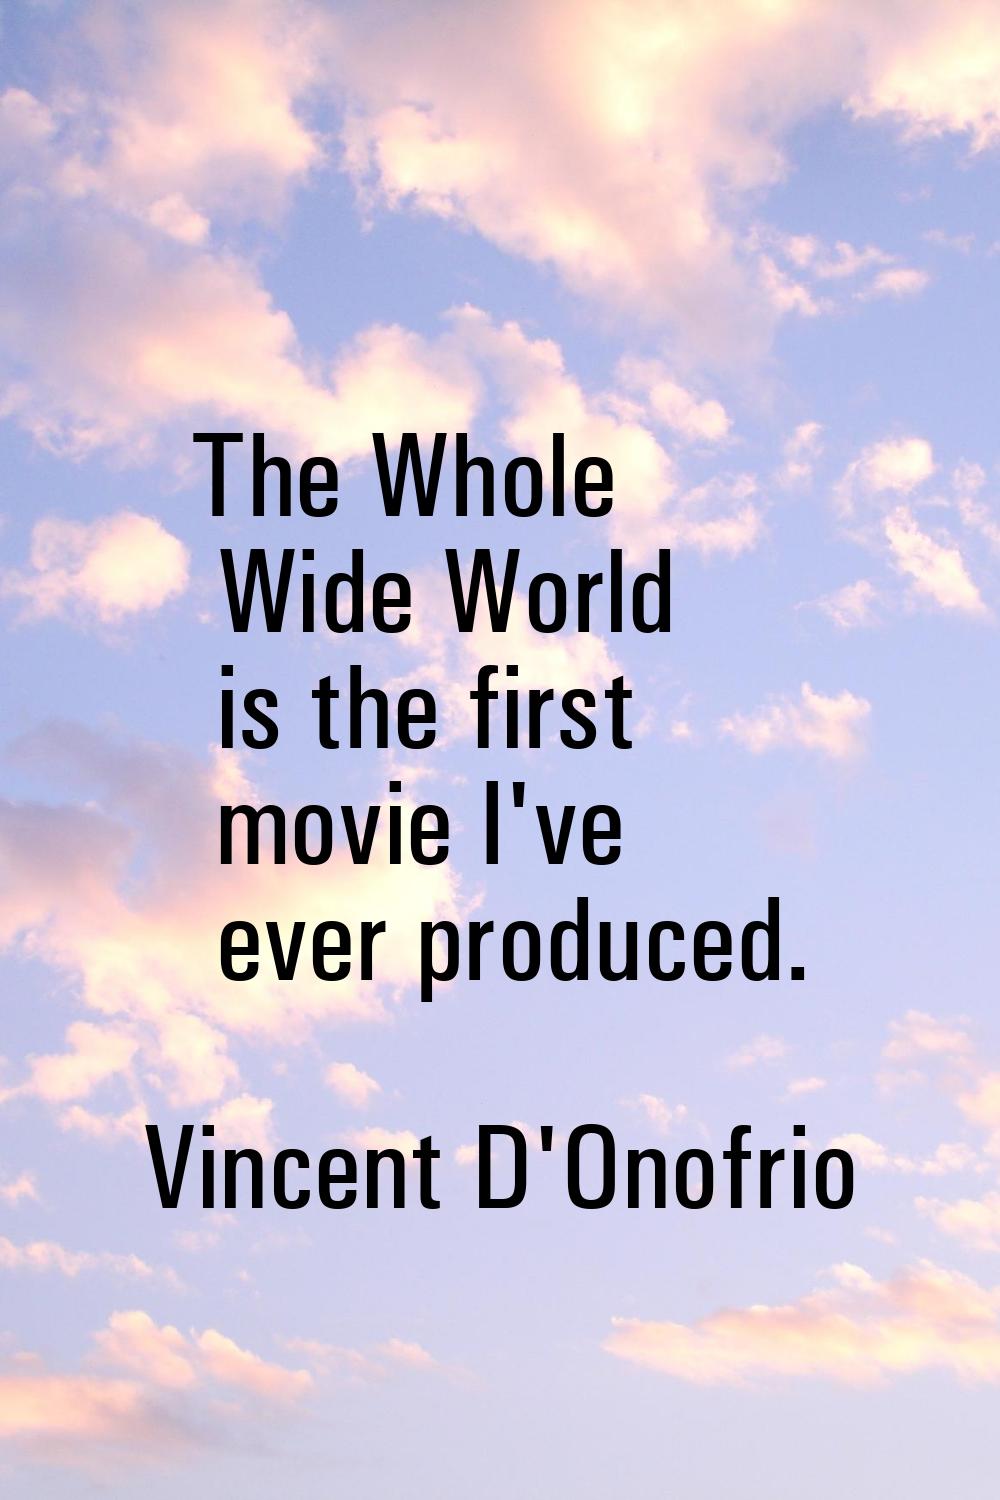 The Whole Wide World is the first movie I've ever produced.